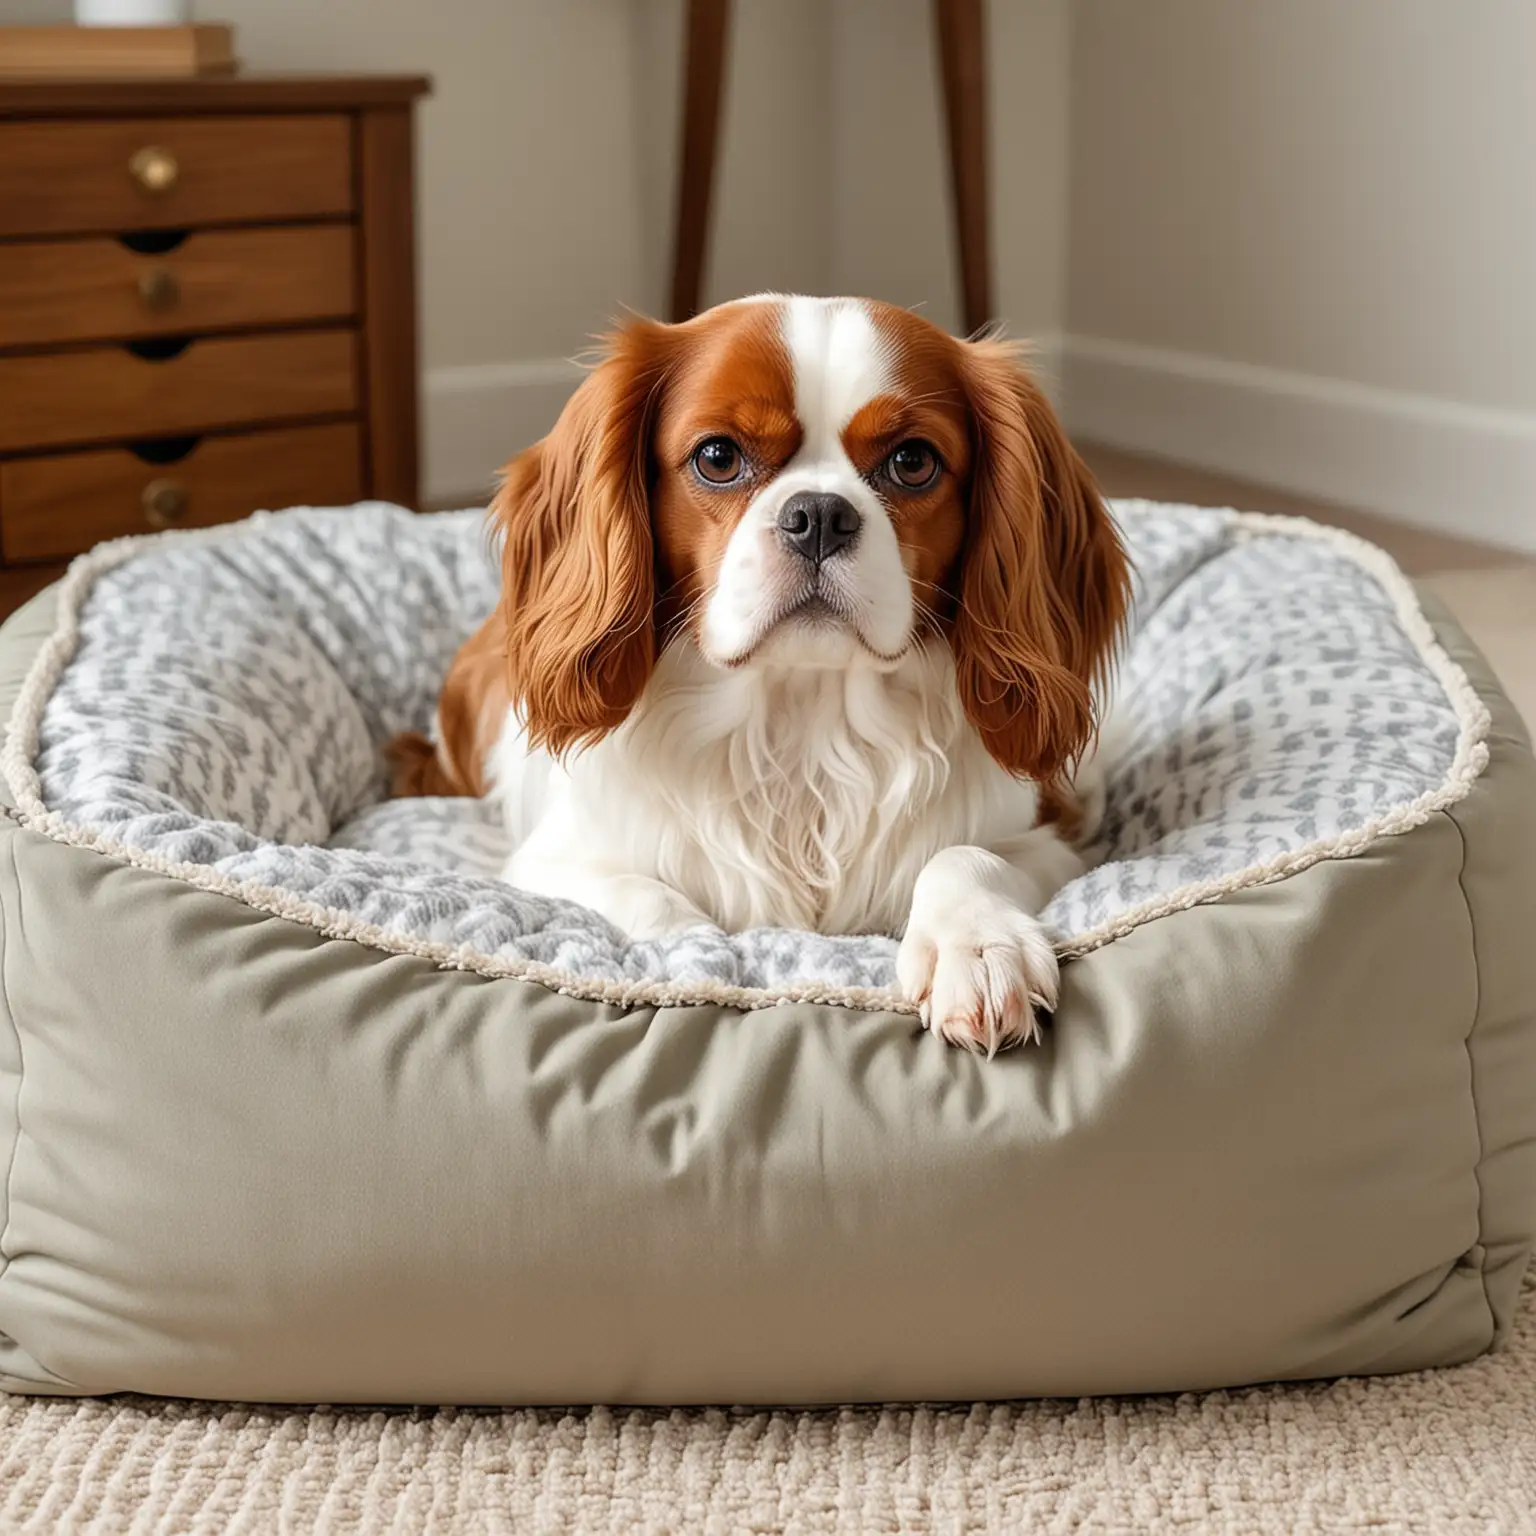 Adorable Cavalier King Charles Spaniel Relaxing in Cozy Dog Bed